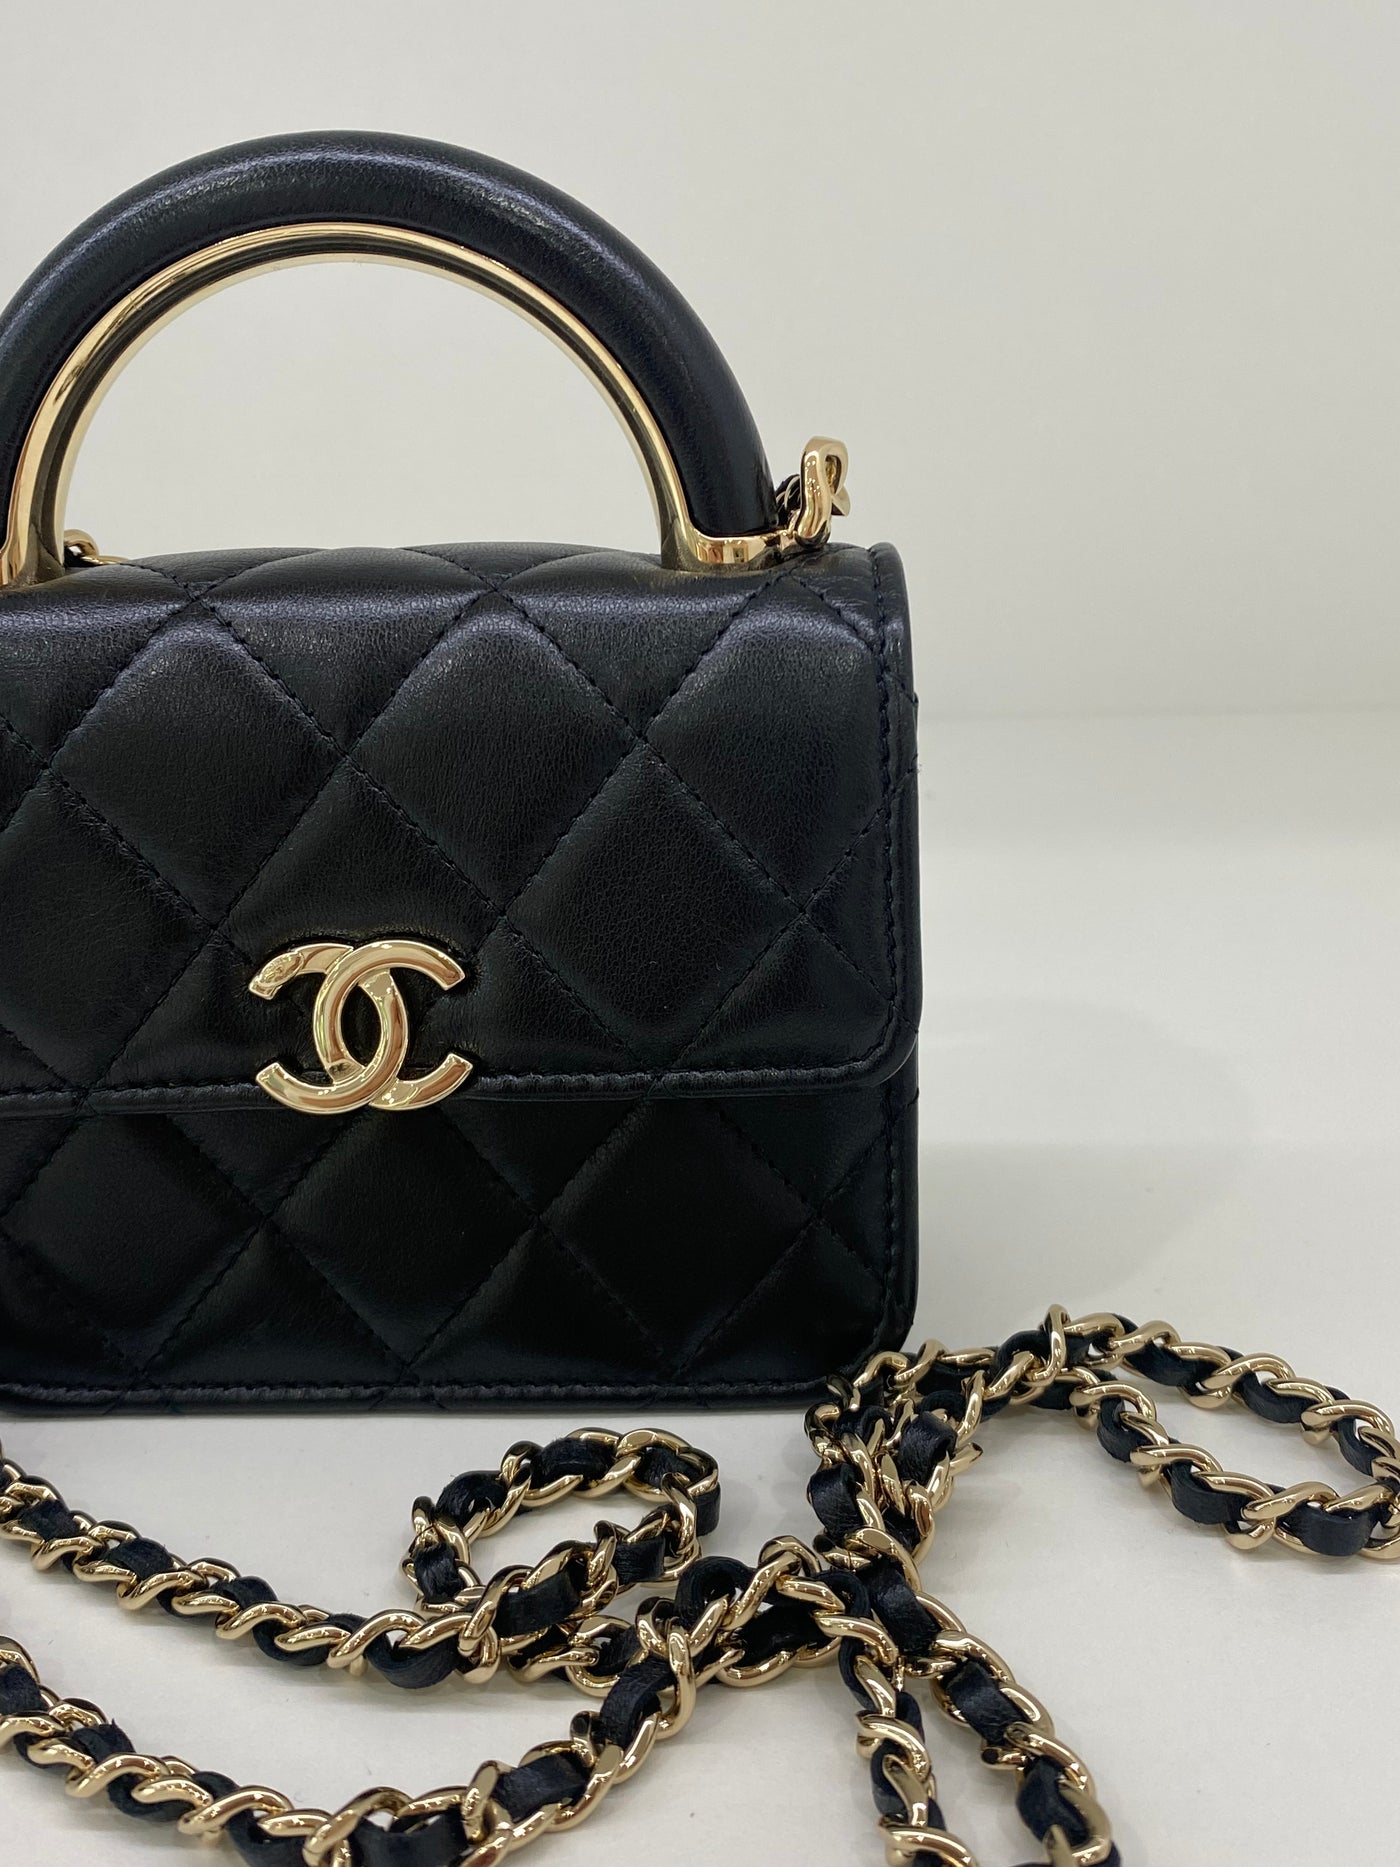 Chanel Coin Purse with Strap- Black